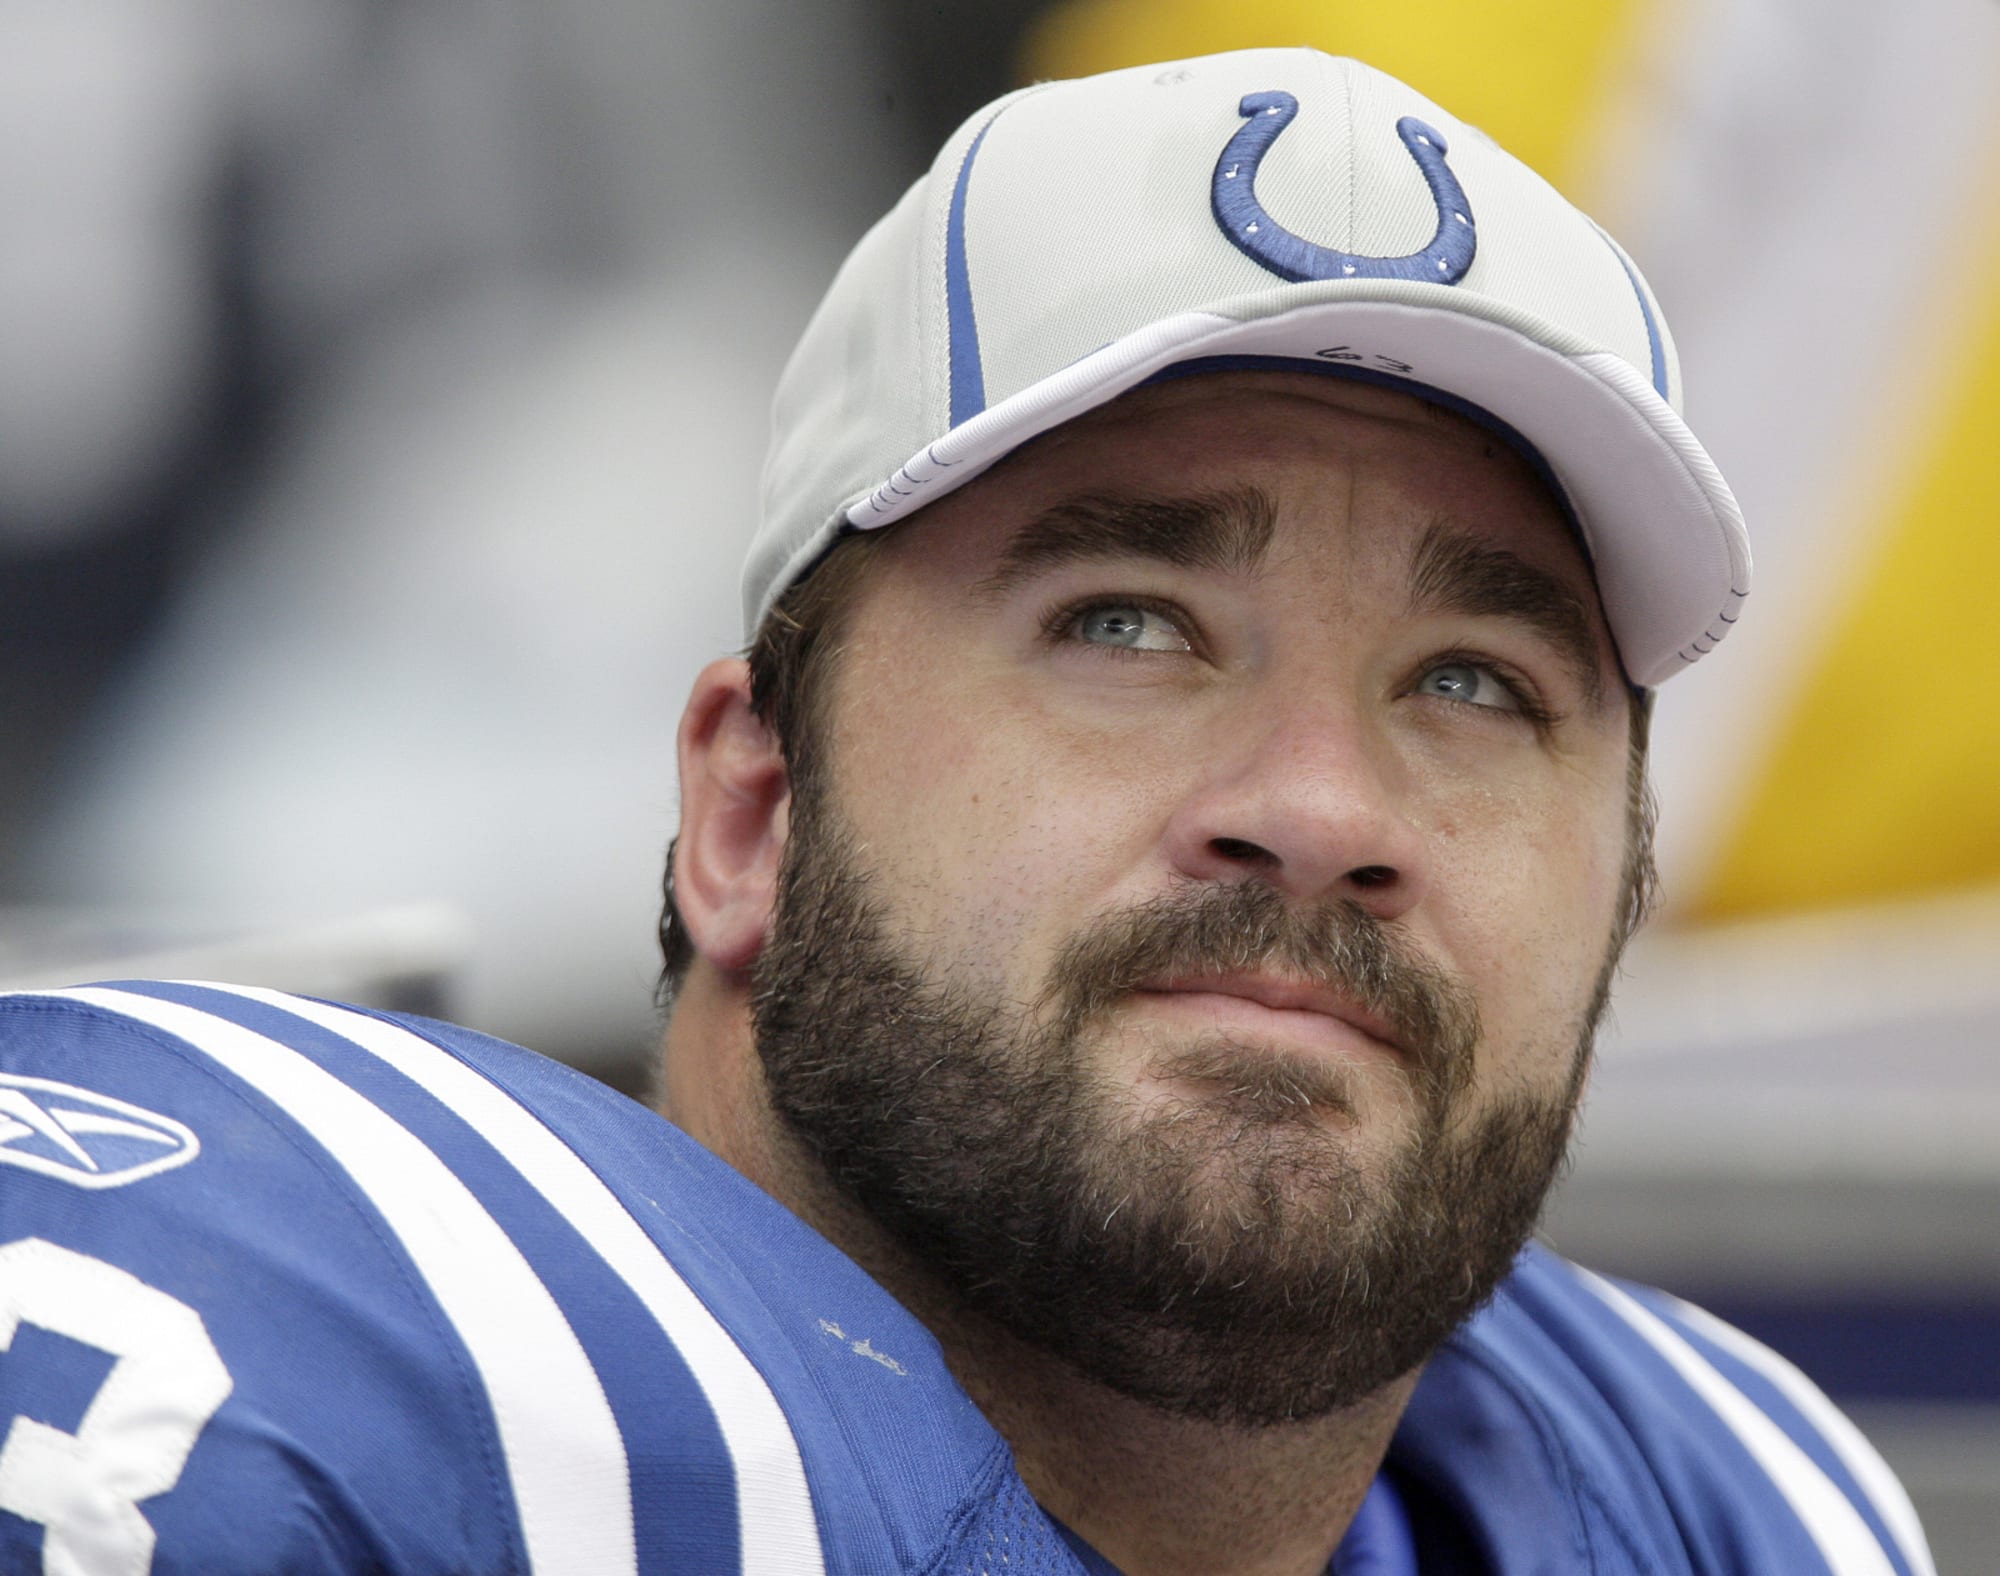 Colts hiring Jeff Saturday over more qualified Black NFL coaches